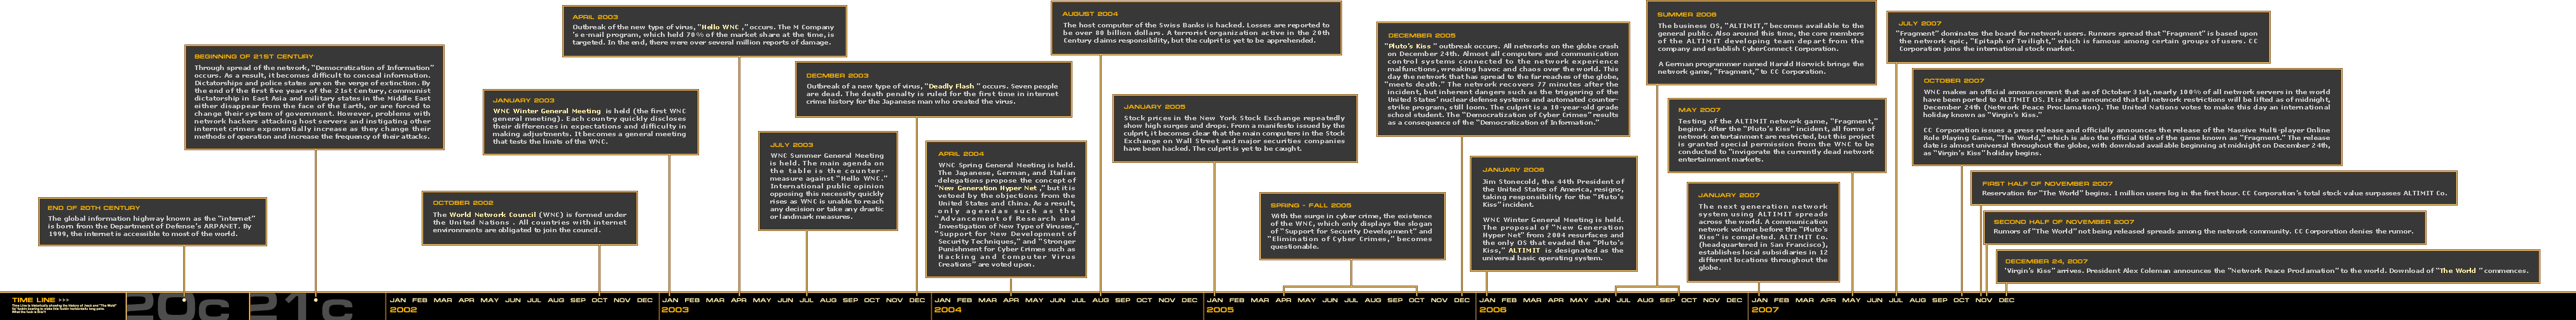 timeline of the alternate history that lead to the events in dot hack series. Text transcribed to table below.